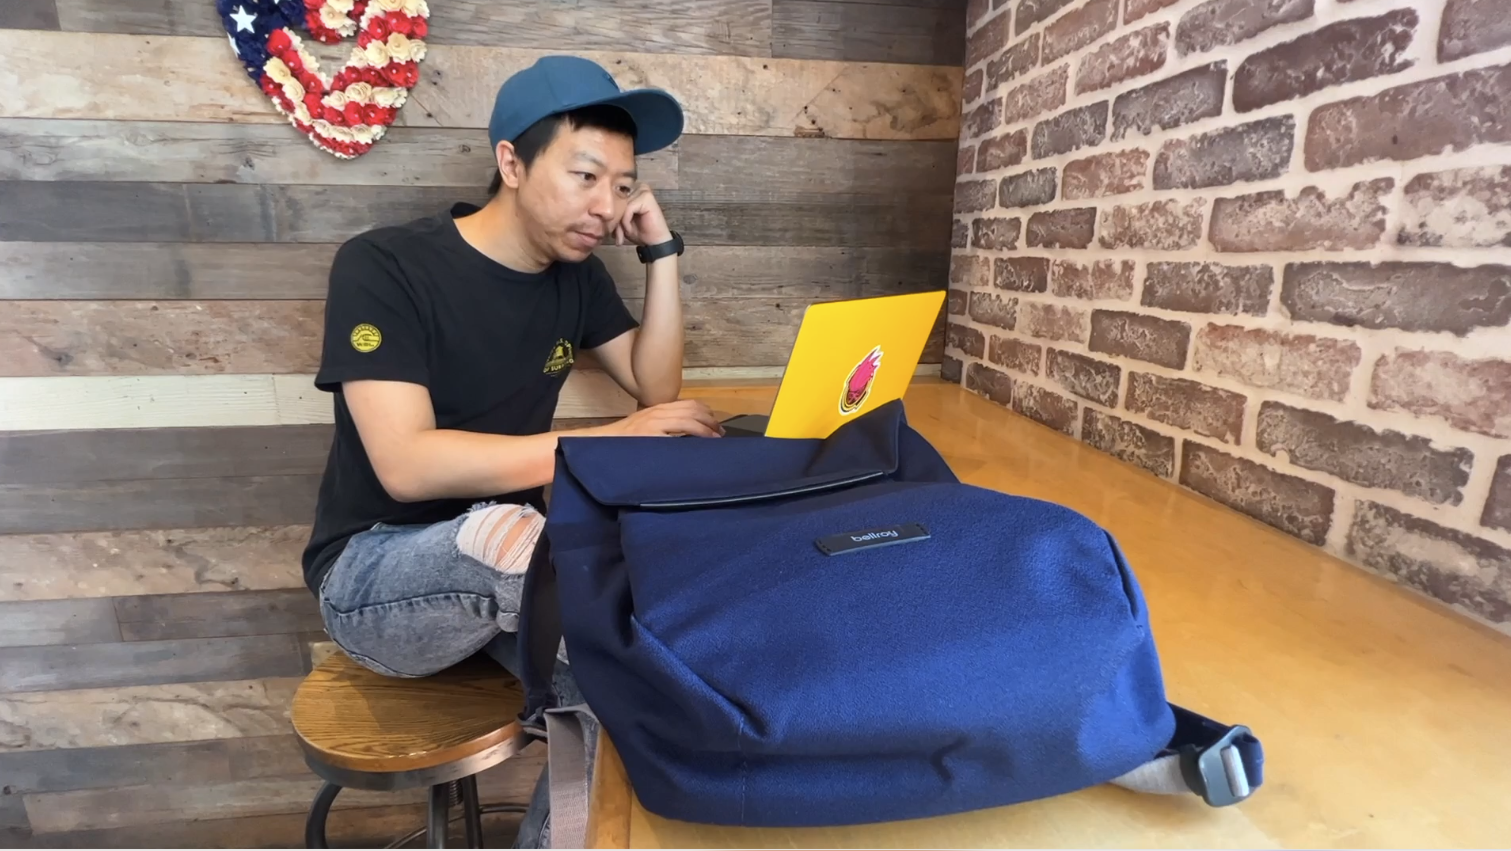 pm backpack review